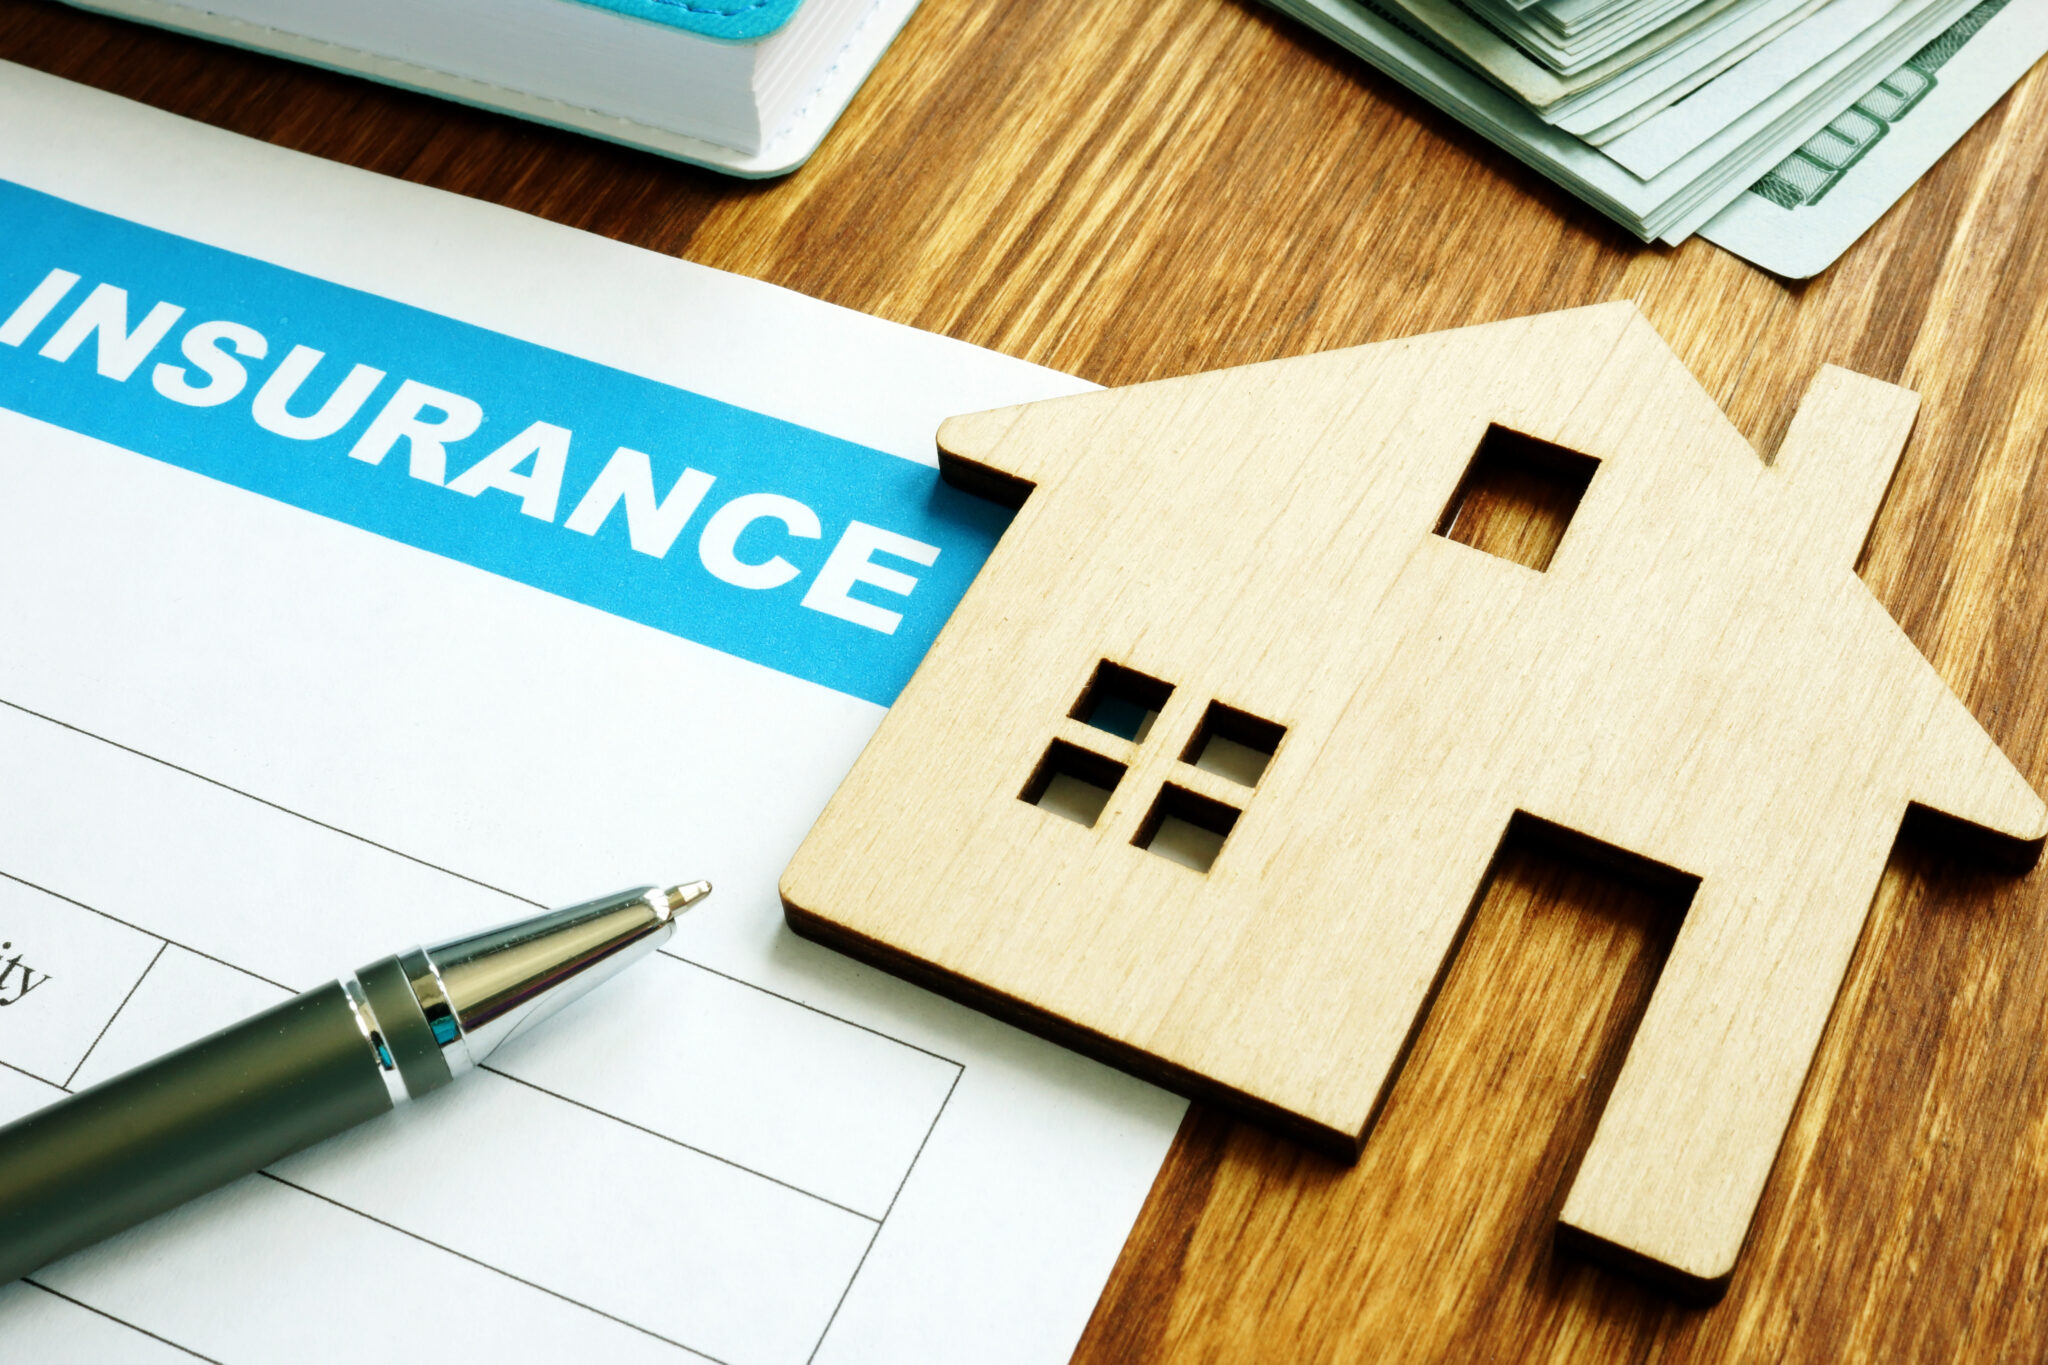 Home insurance form for homeowners and model of home.